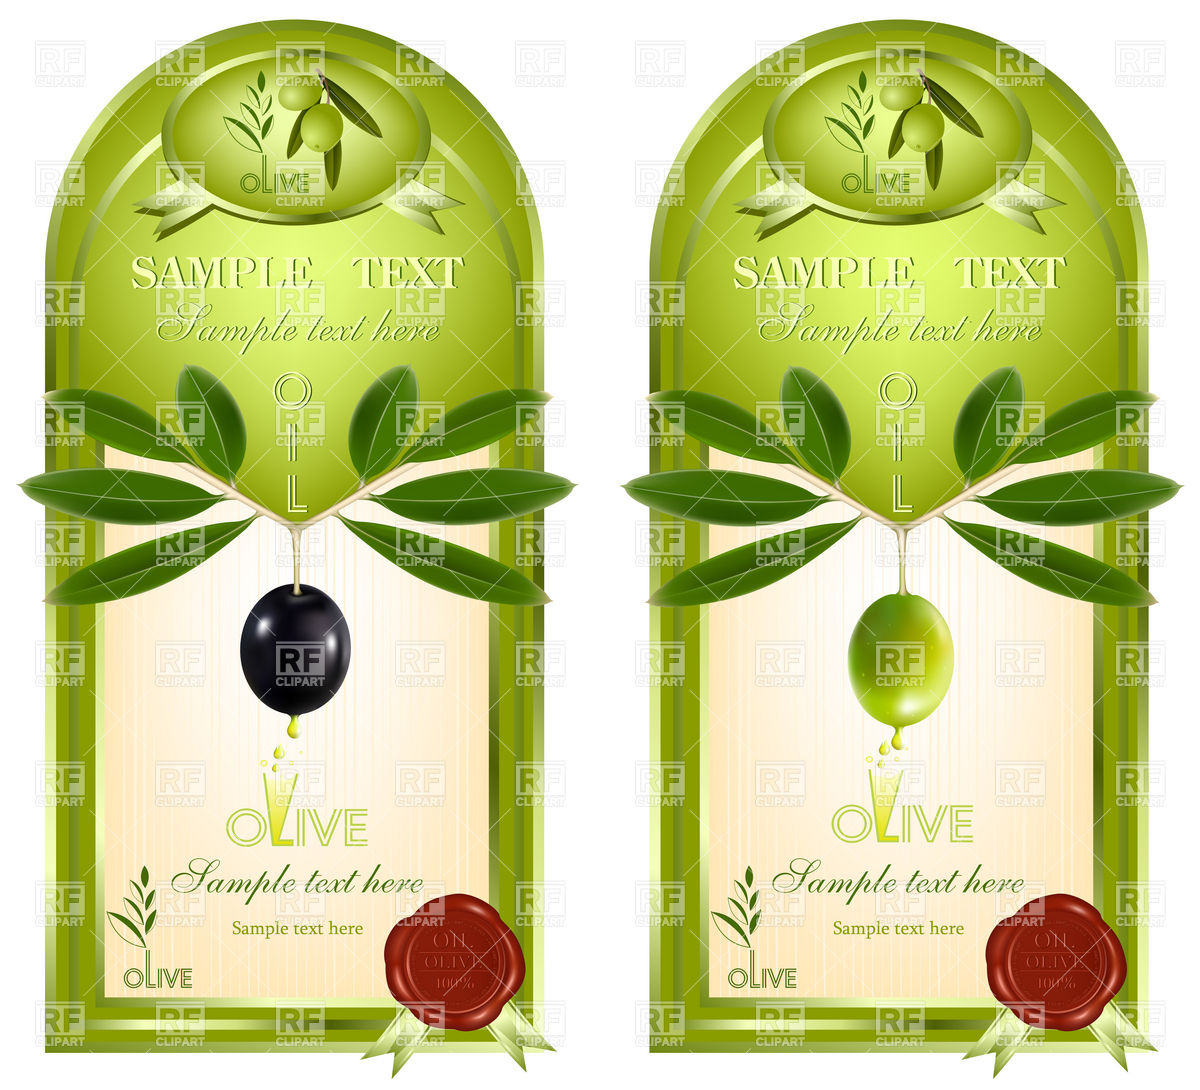 Olive Oil Clipart Label For Olive Oil With Wax